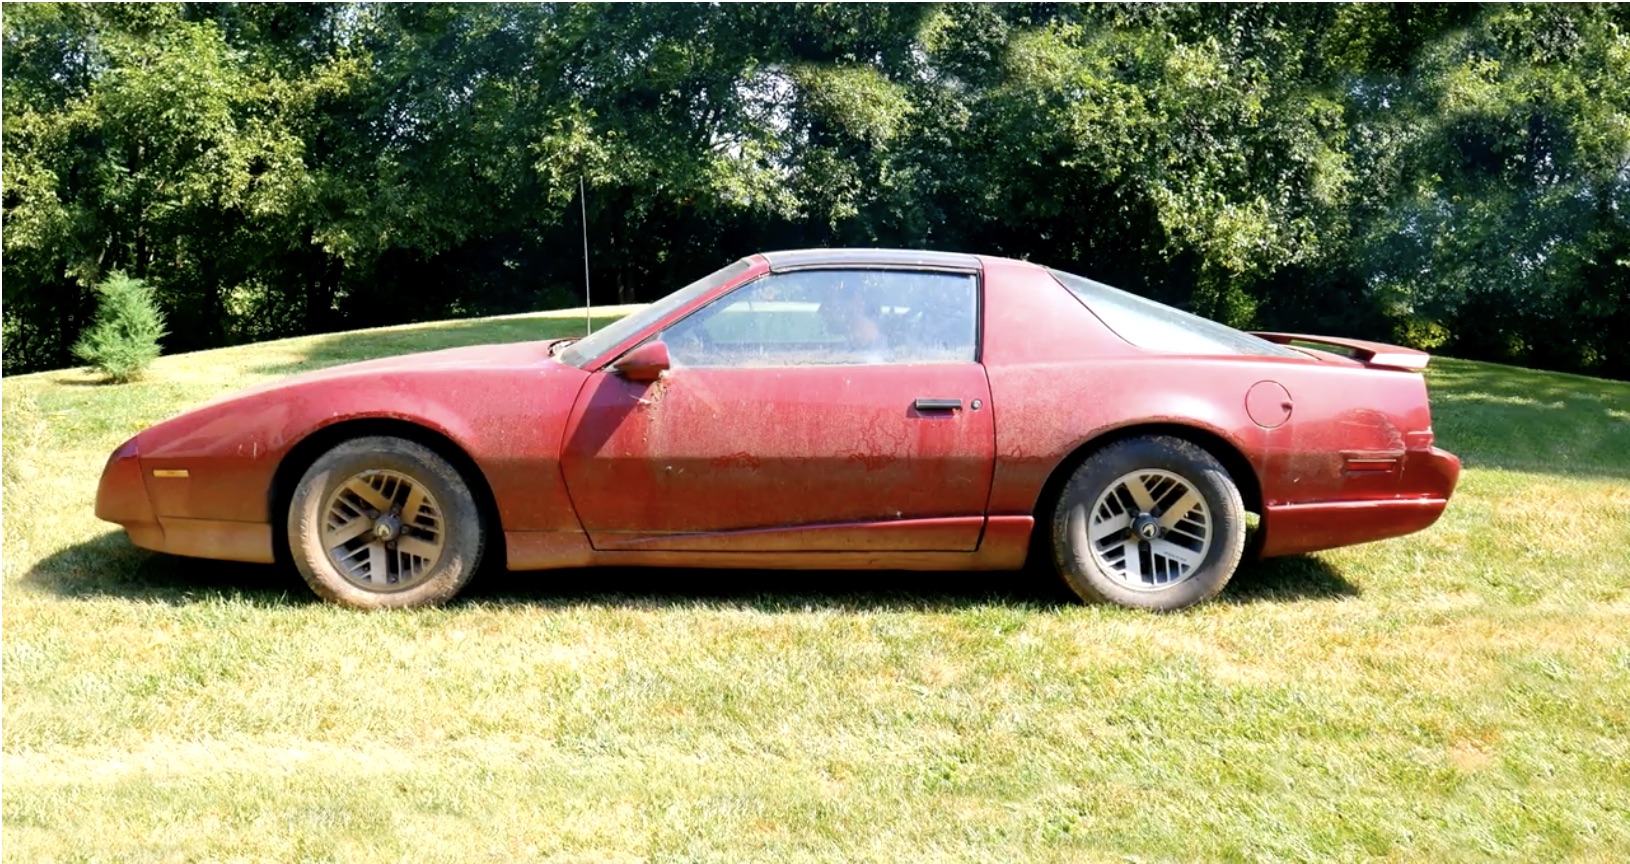 The Homecoming Rescue: Waking Up A 1991 Firebird After Years Of Sitting